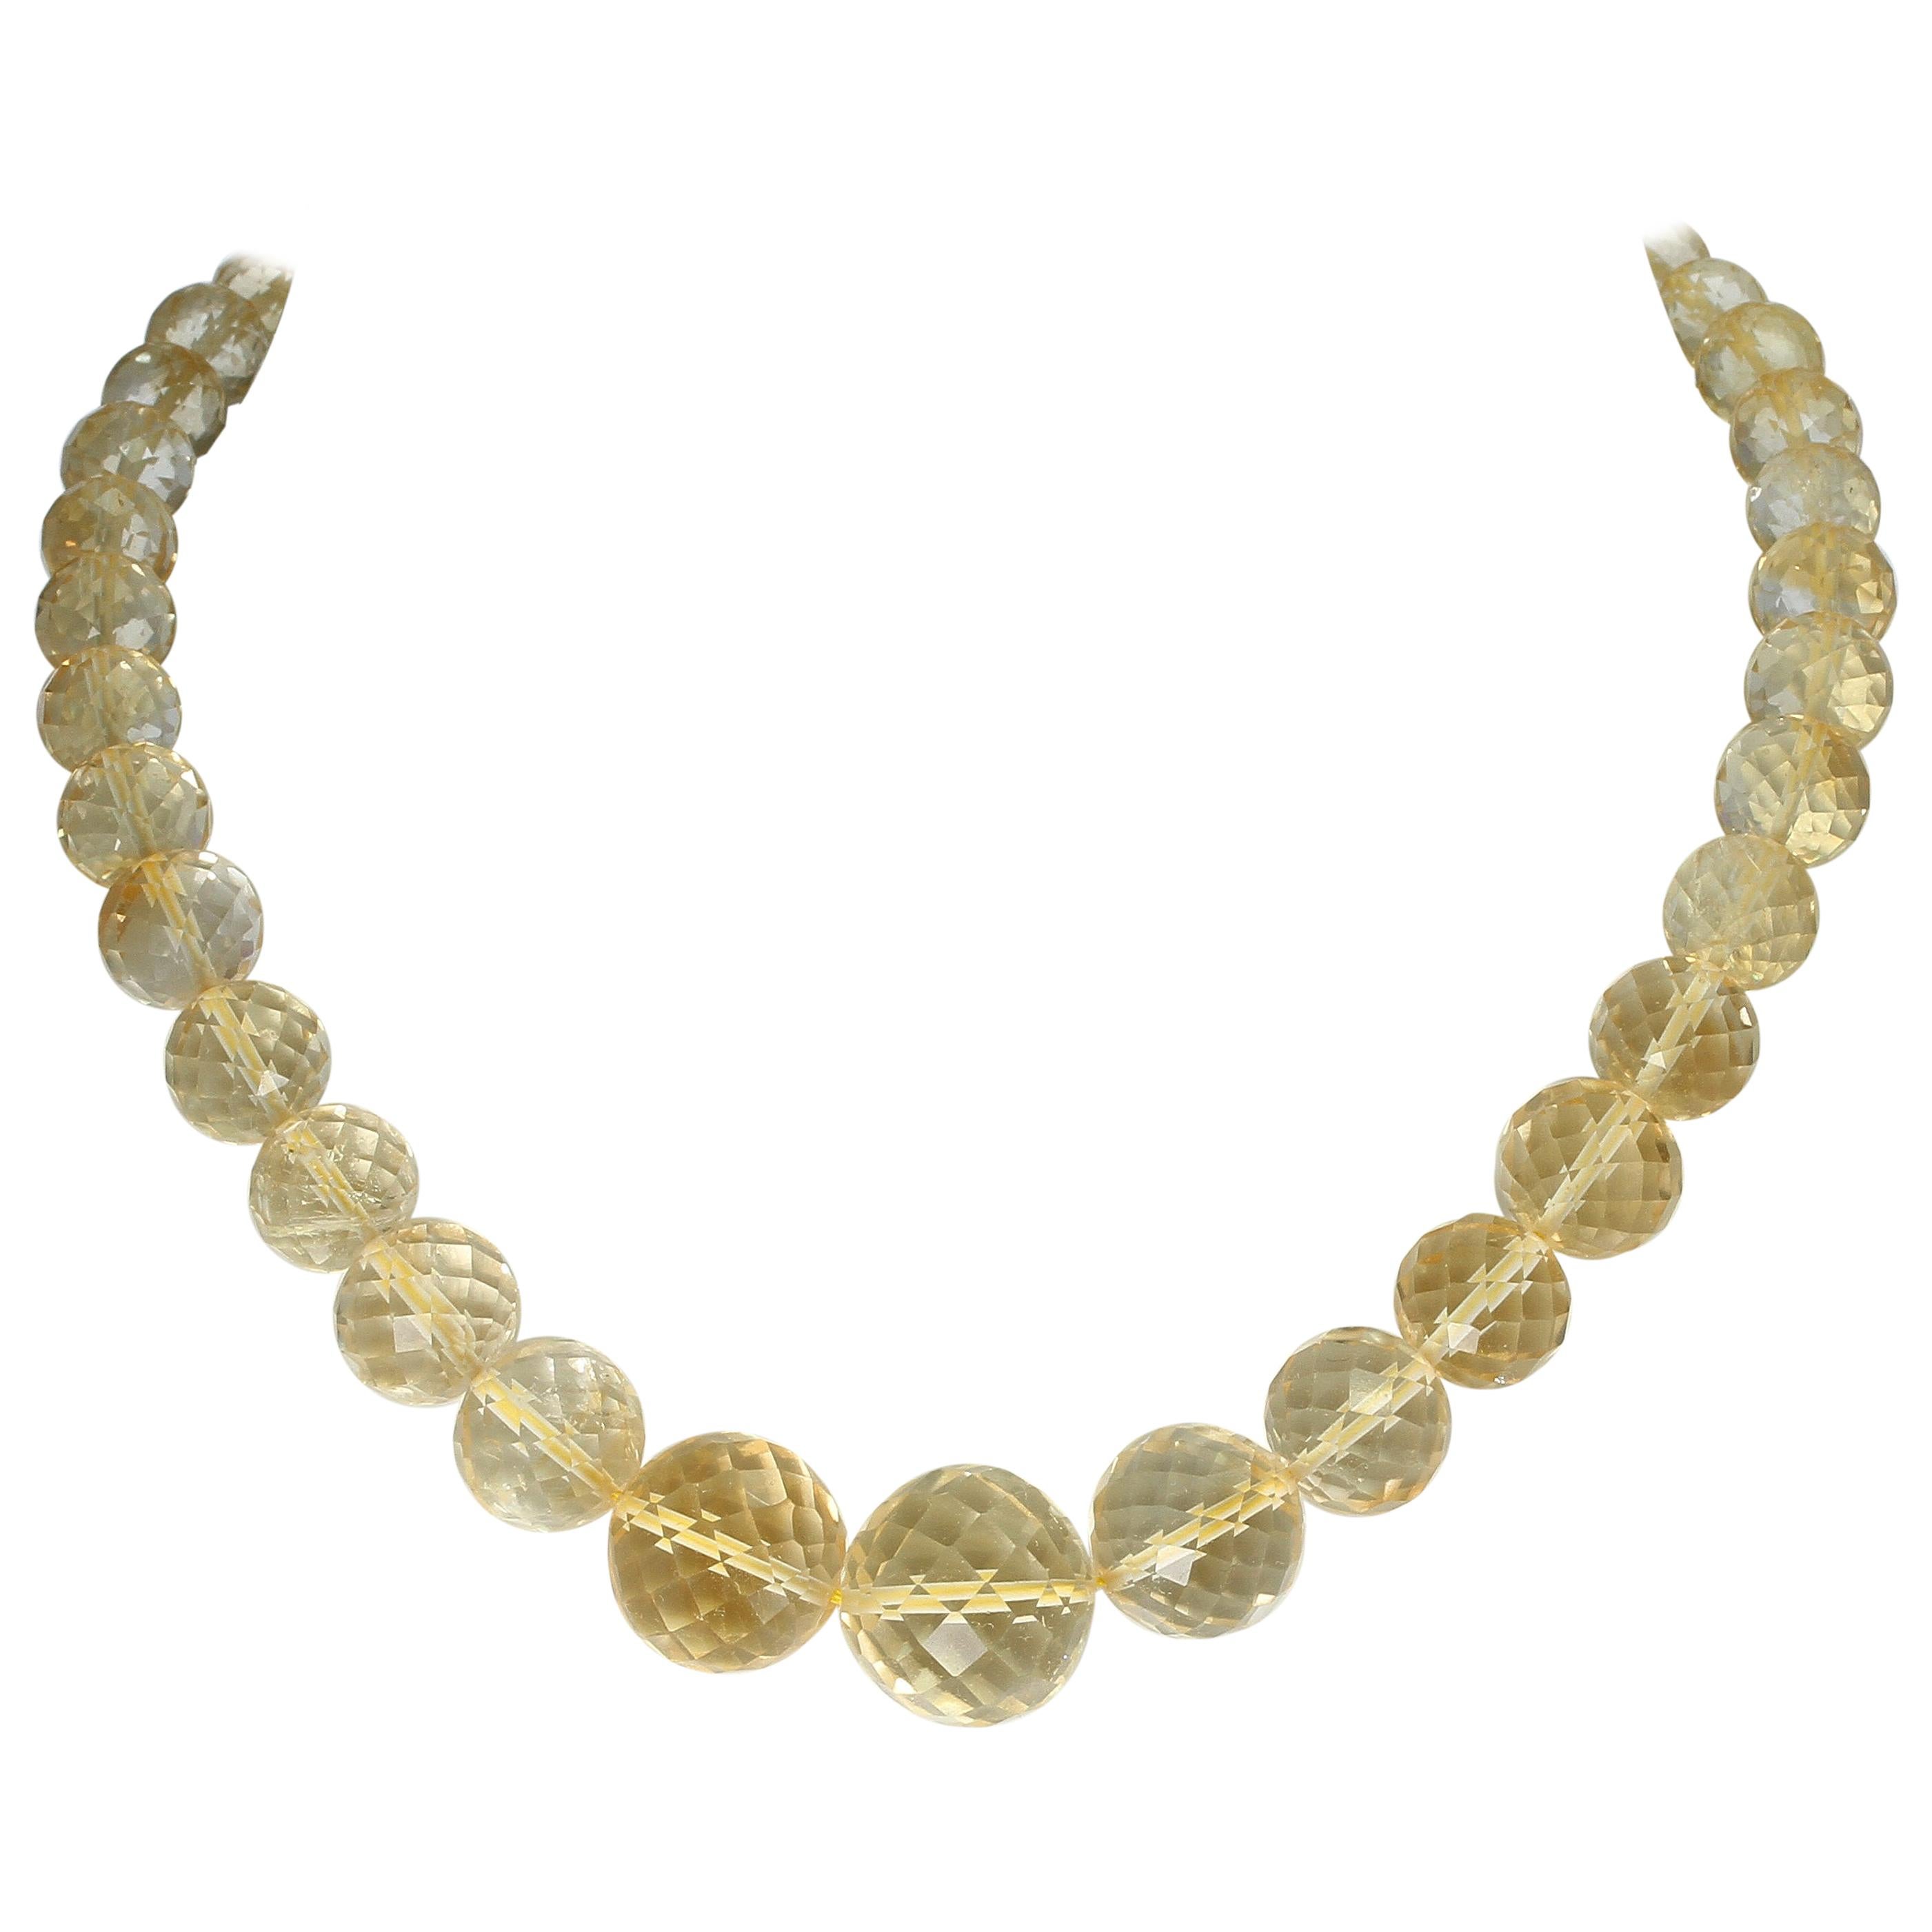 Genuine and Natural Large Citrine Round Faceted Beads Necklace